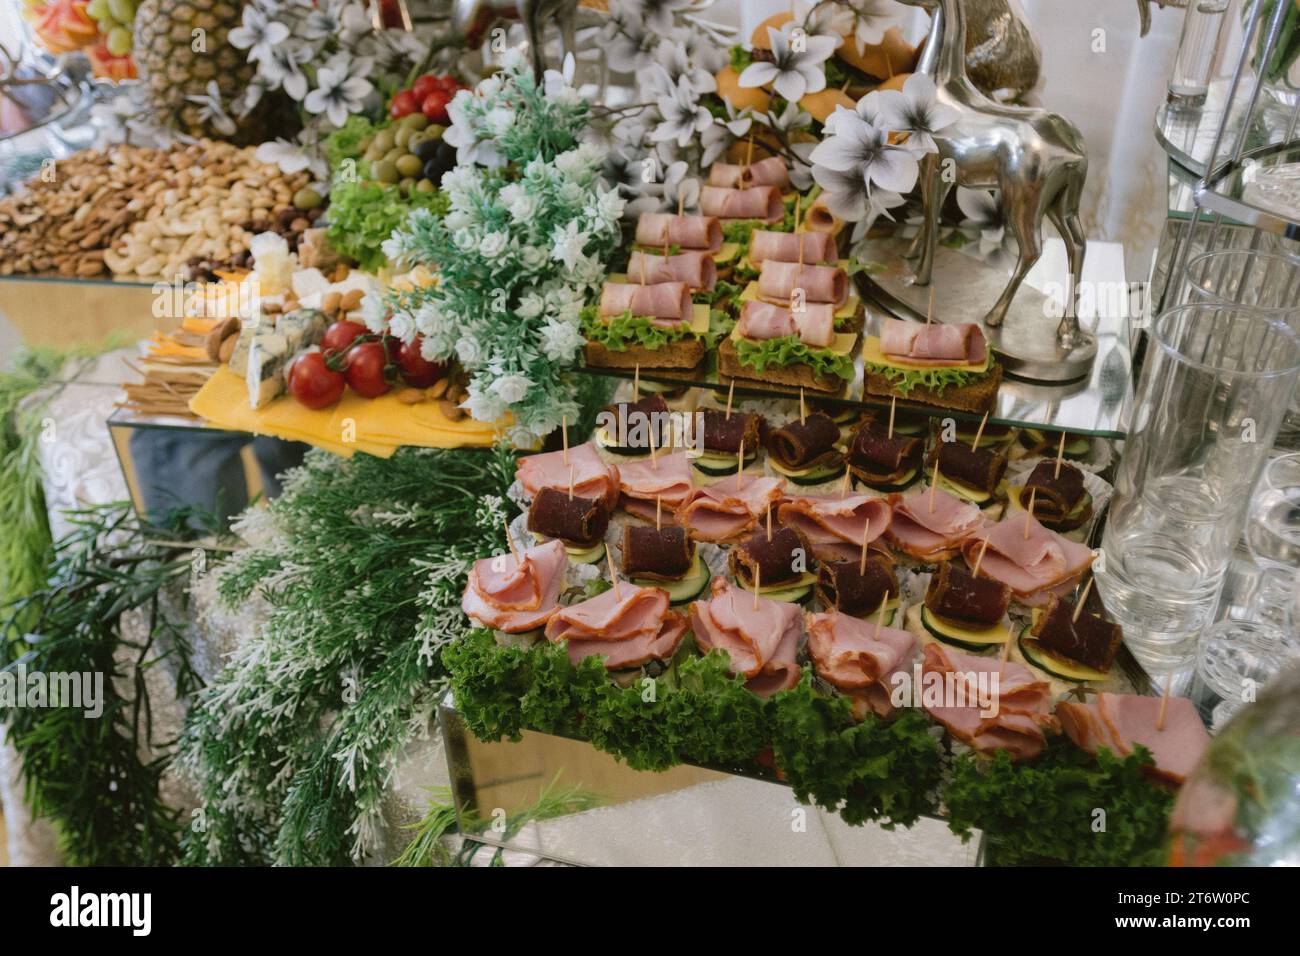 A selection of freshly prepared ham sandwiches and other cured meats is displayed on a white platter Stock Photo